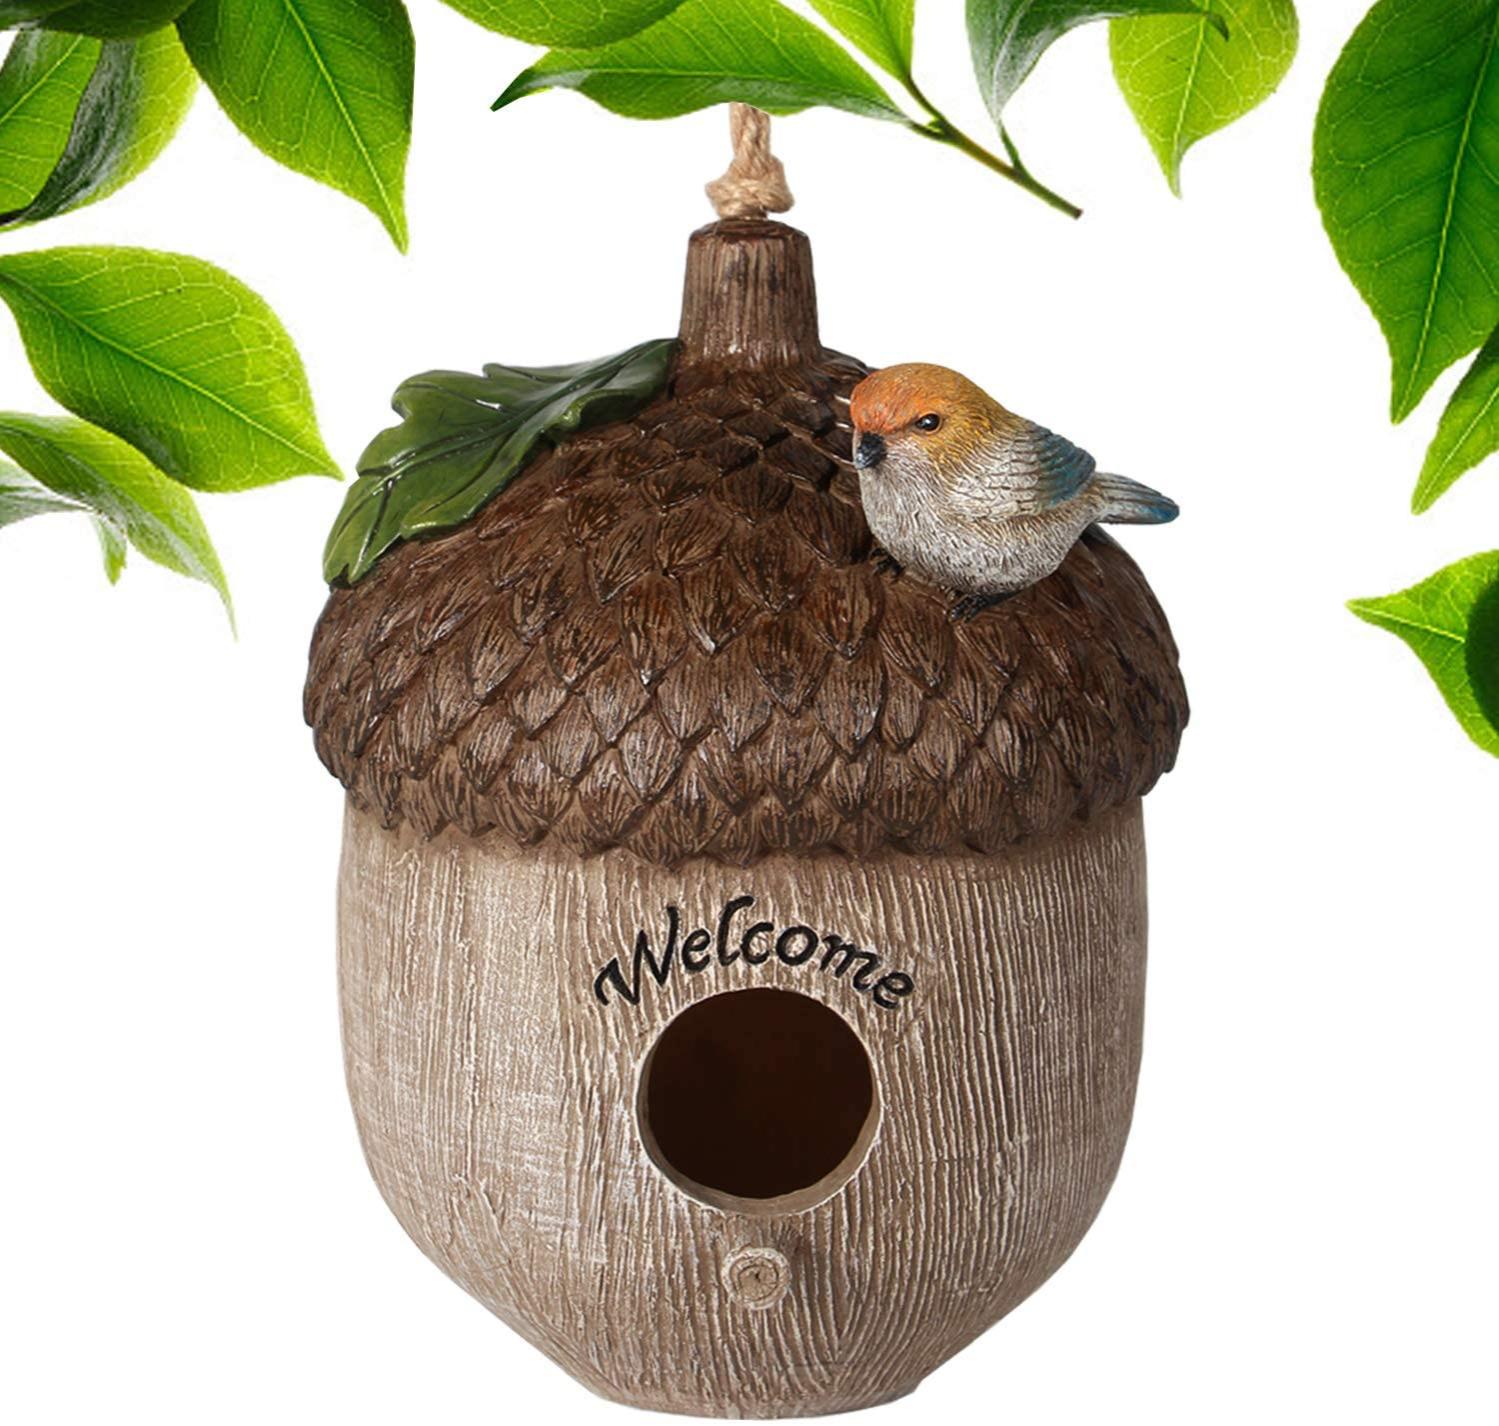 BIRD HOUSE FOR OUTSIDE, RESTING PLACE FOR BIRDS, HANGING NATURAL BIRD NEST